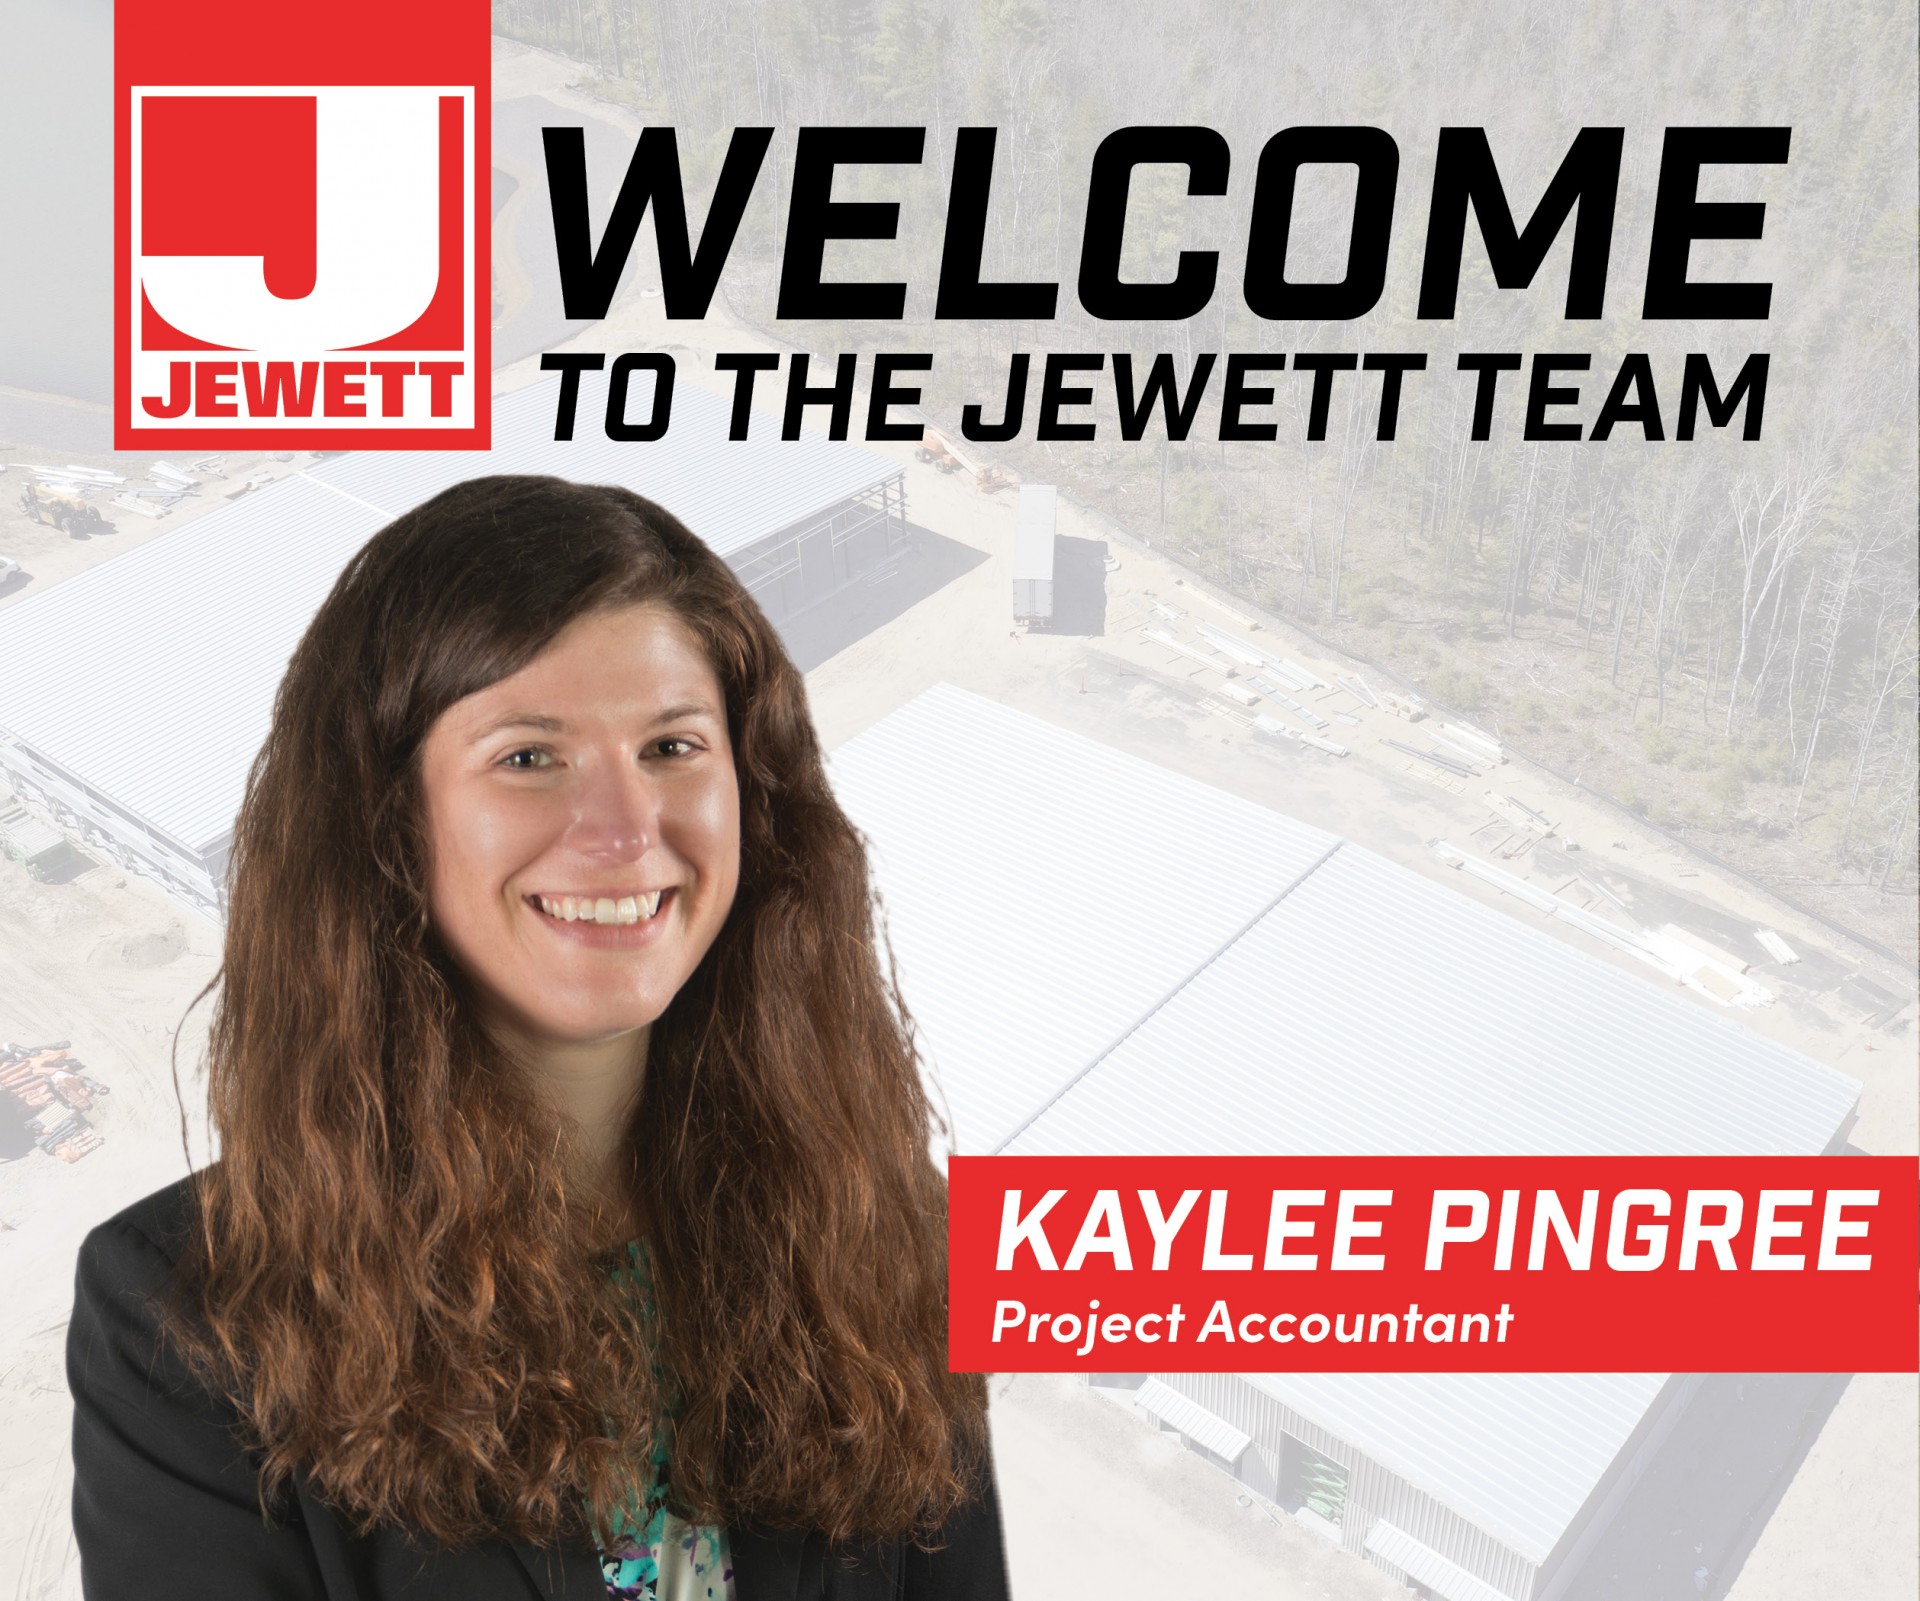 Jewett Construction Welcomes Kaylee Pingree to Our Team